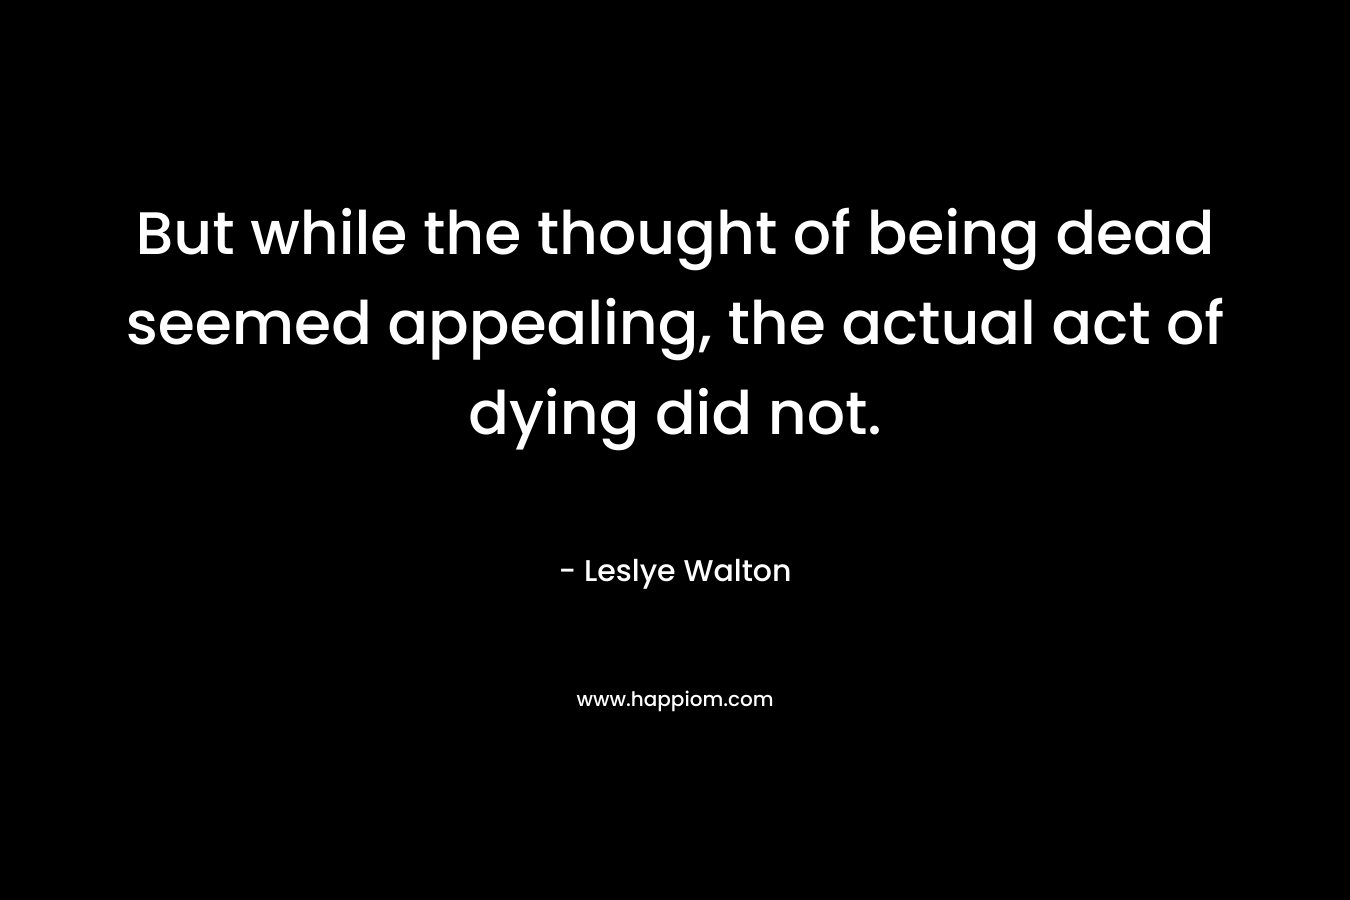 But while the thought of being dead seemed appealing, the actual act of dying did not. – Leslye Walton